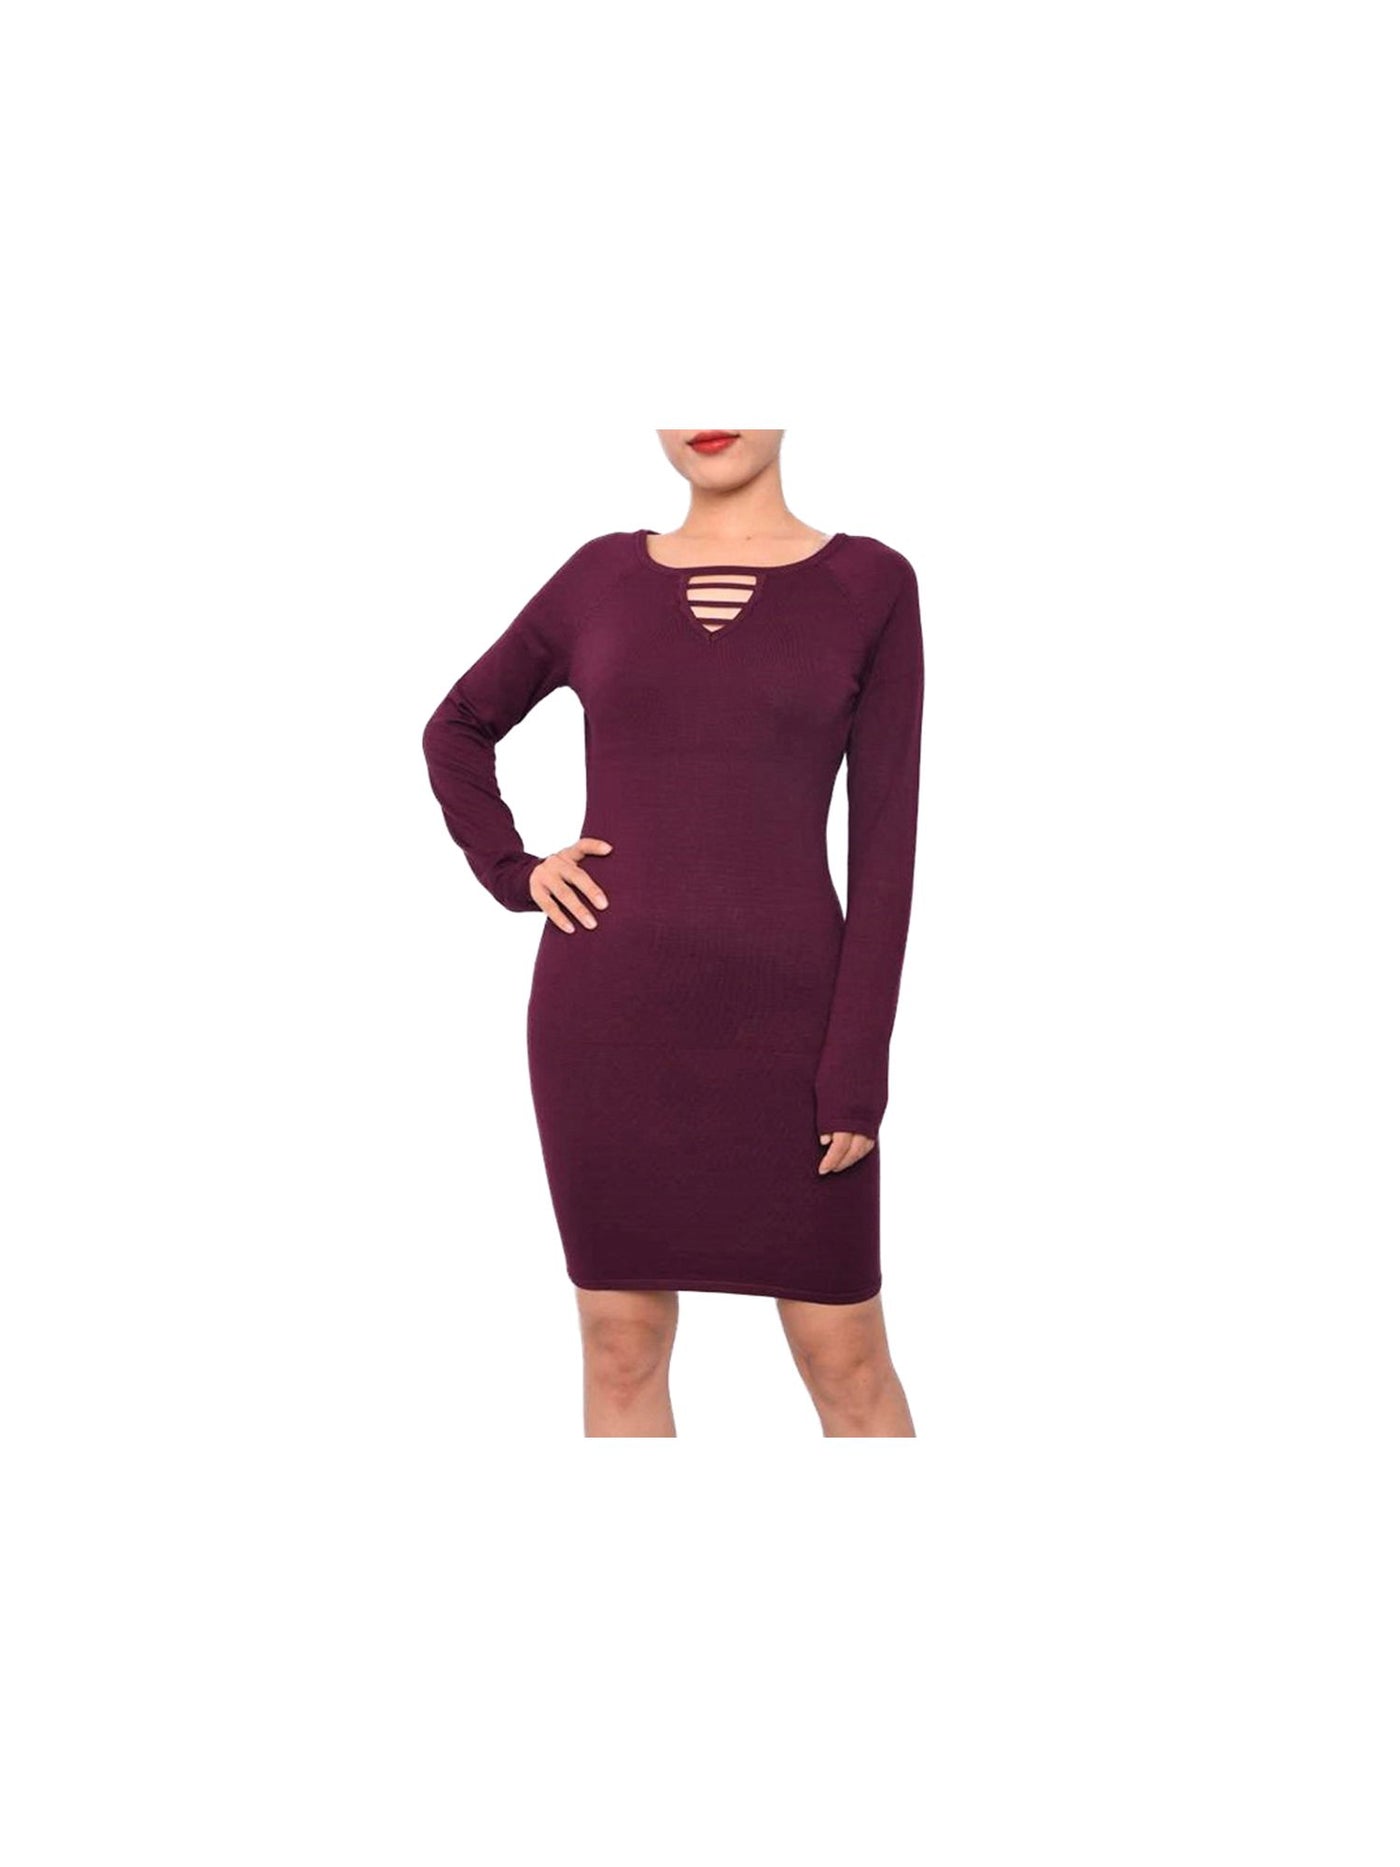 PLANET GOLD Womens Burgundy Long Sleeve Keyhole Above The Knee Body Con Dress Juniors M